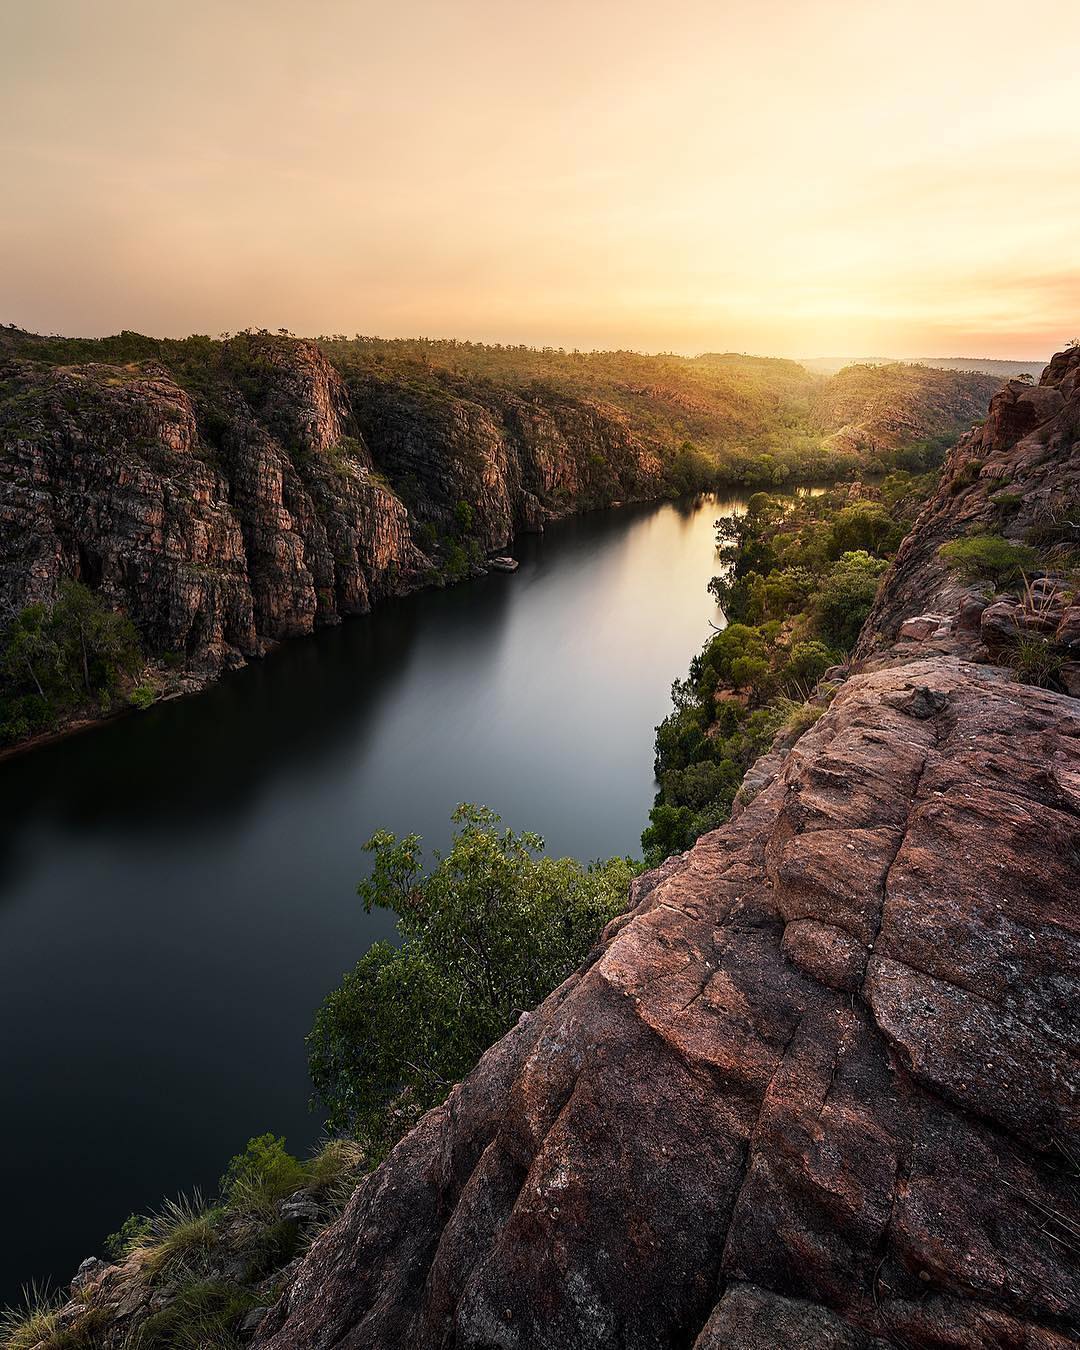 visit a total of thirteen gorges that make up the Katherine gorge